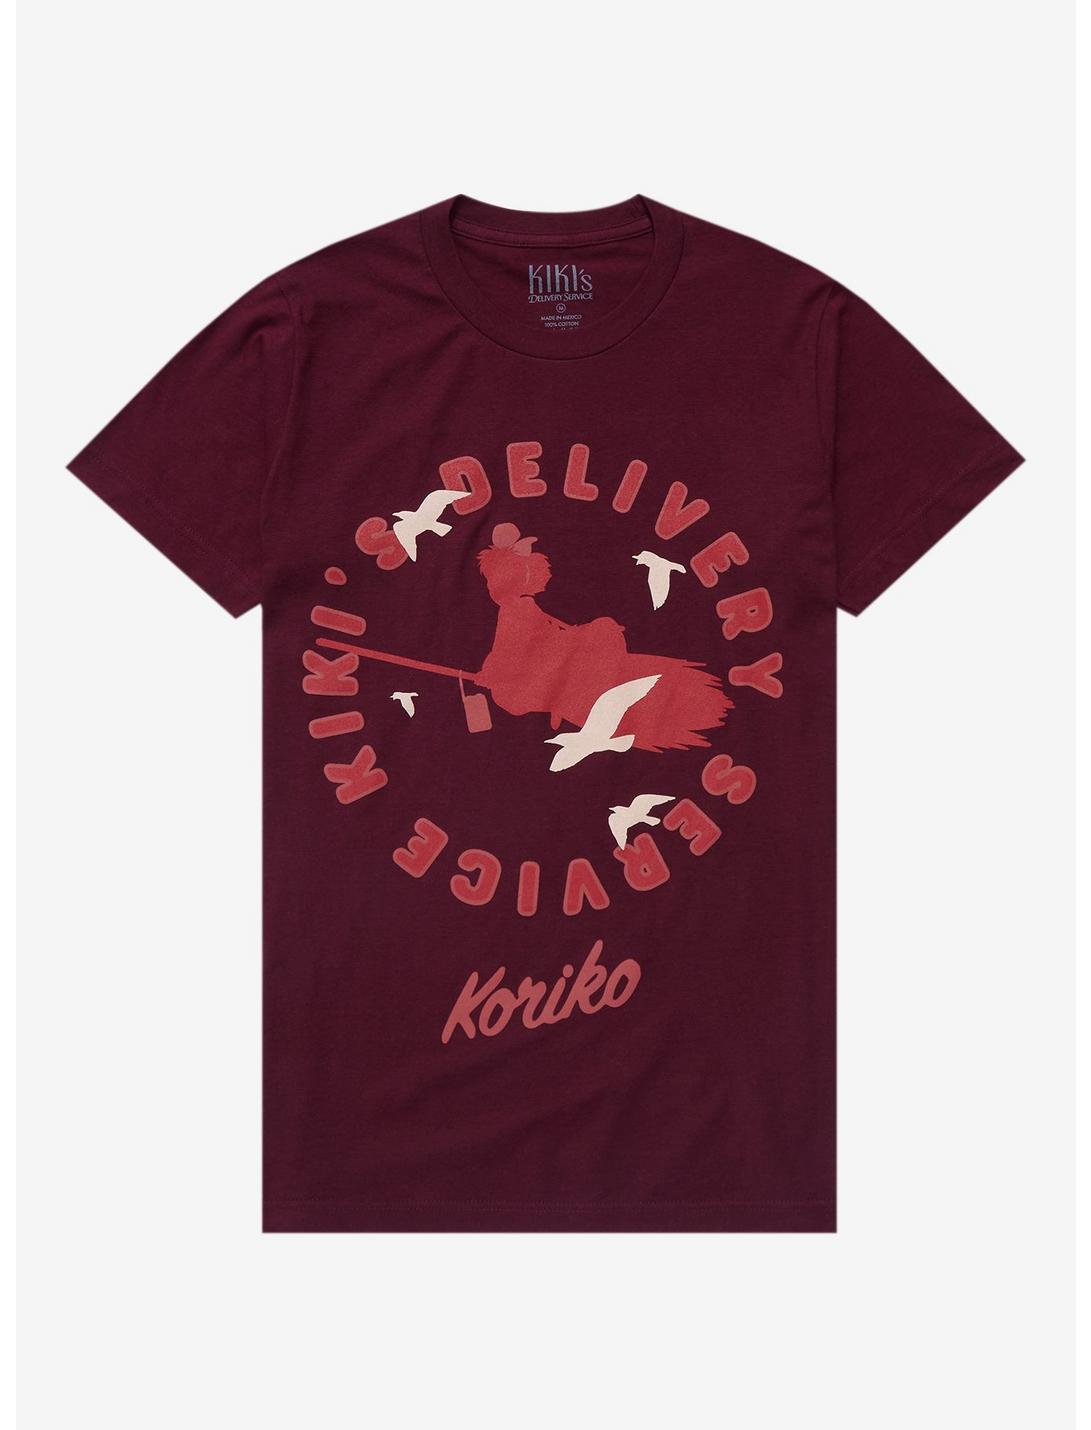 Studio Ghibli Kiki's Delivery Service Silhouette Women's T-Shirt - BoxLunch Exclusive, BURGUNDY, hi-res